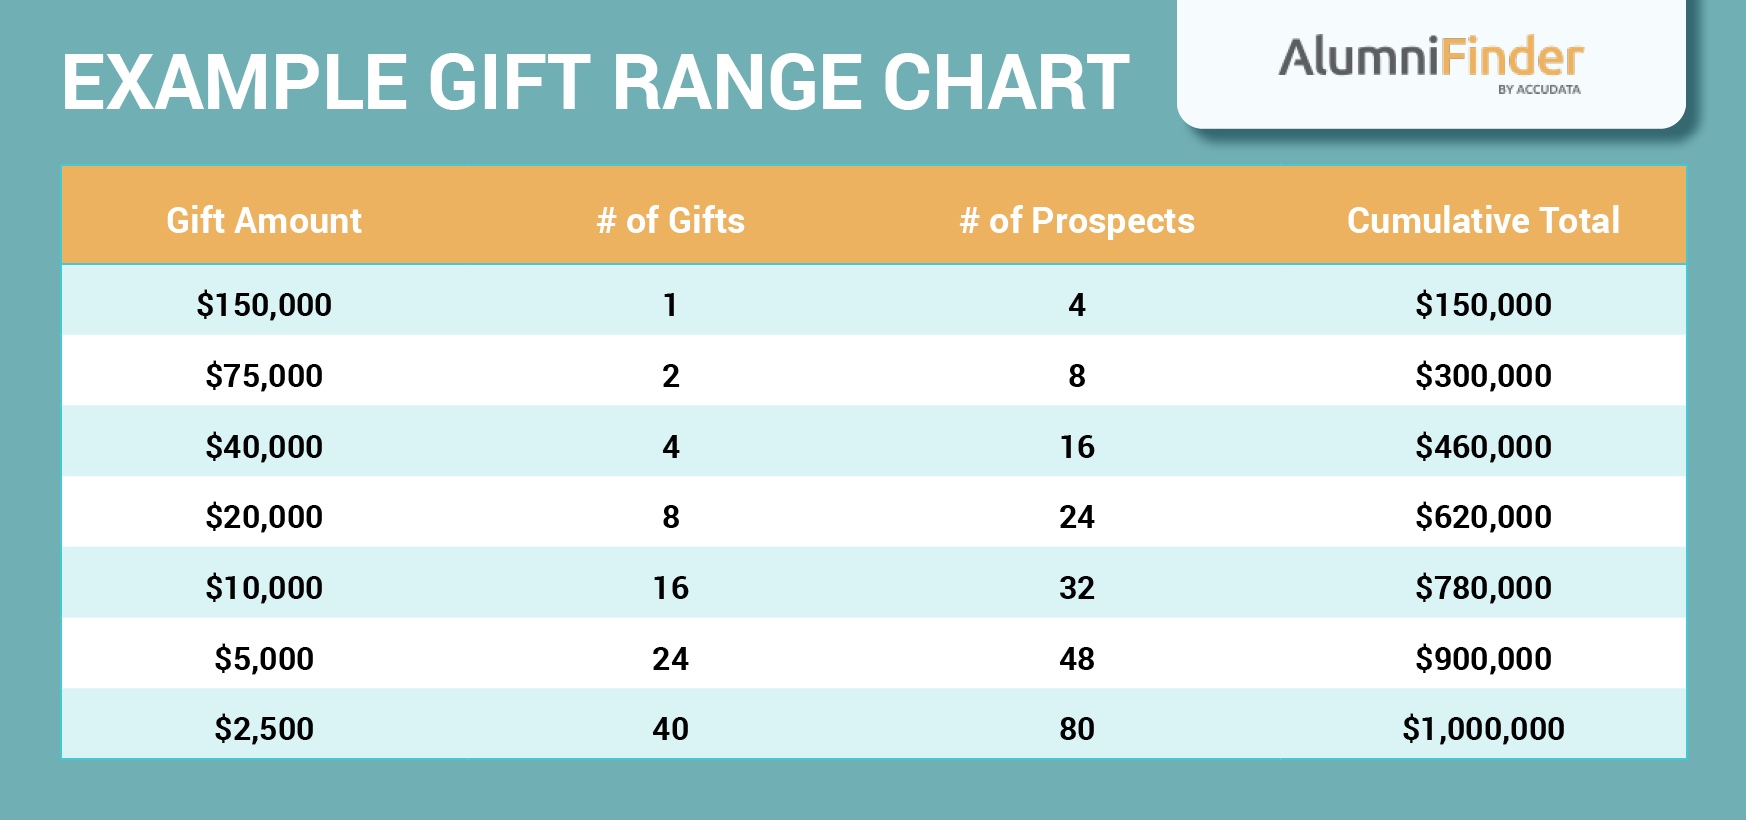 An example of a gift range chart.